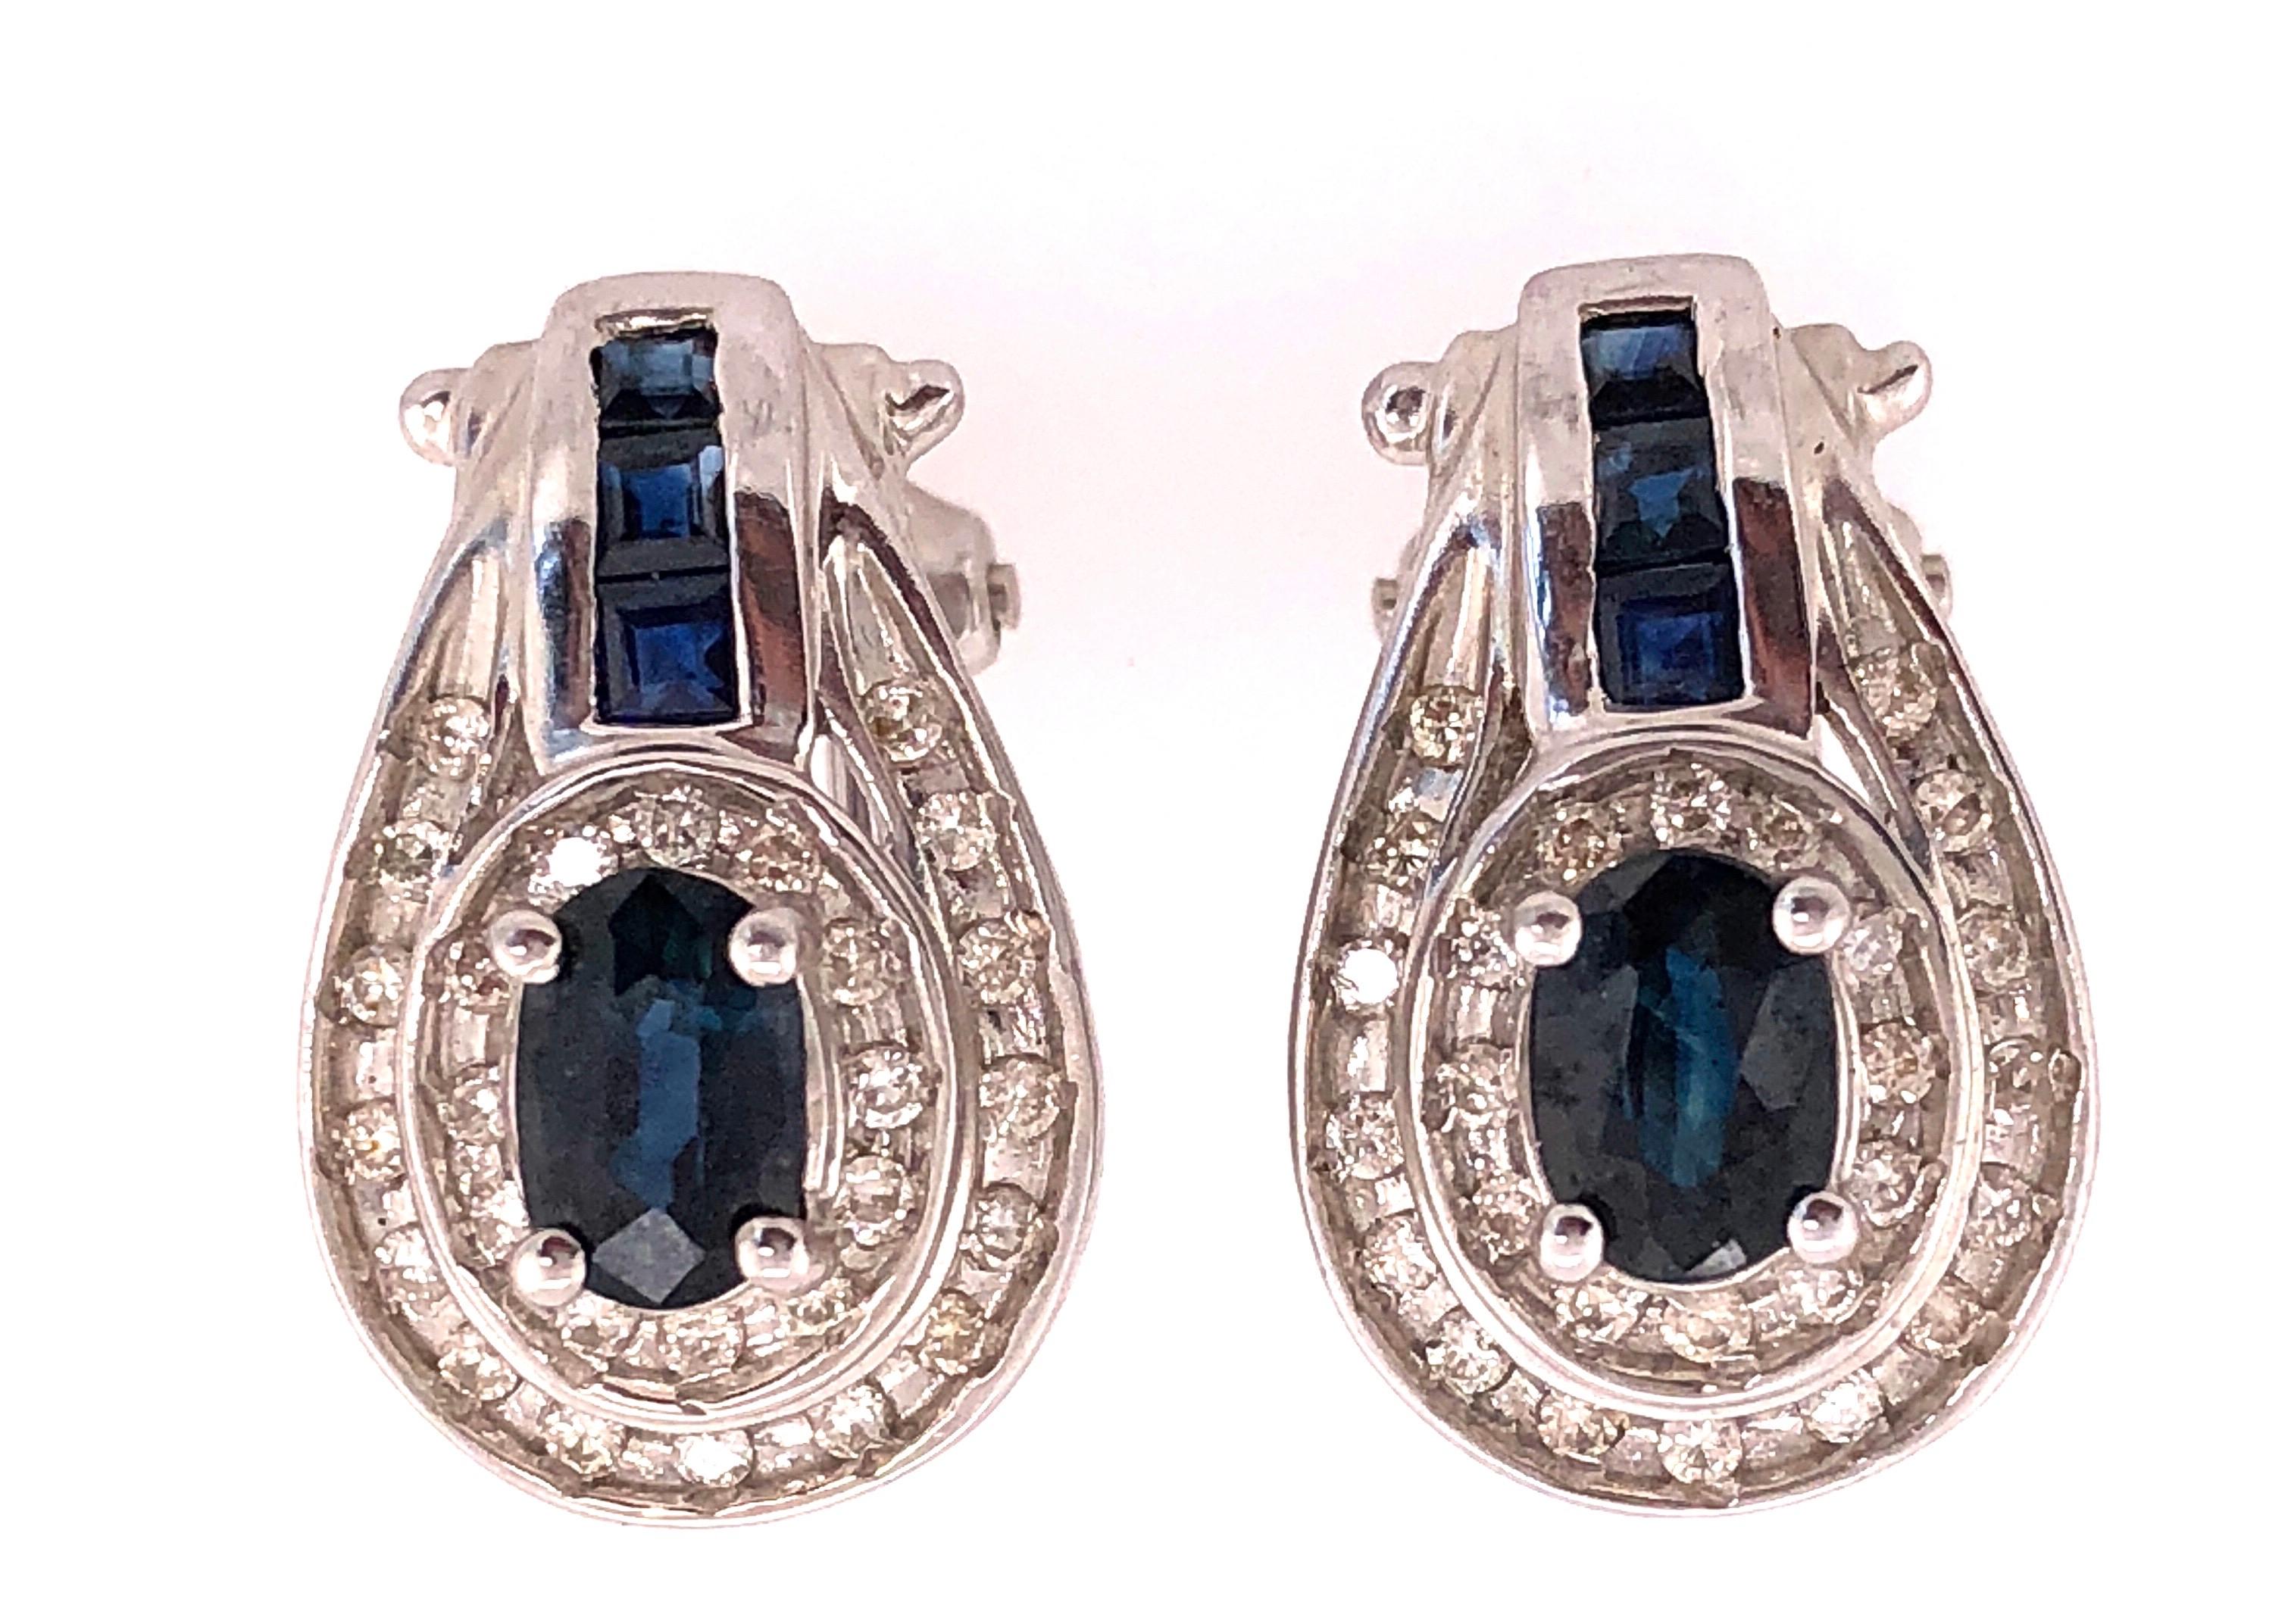 14 Kt White Gold French Back Earrings with Diamonds And Blue Sapphires 1.00 Total Diamond Weight.
6.69 grams total weight.